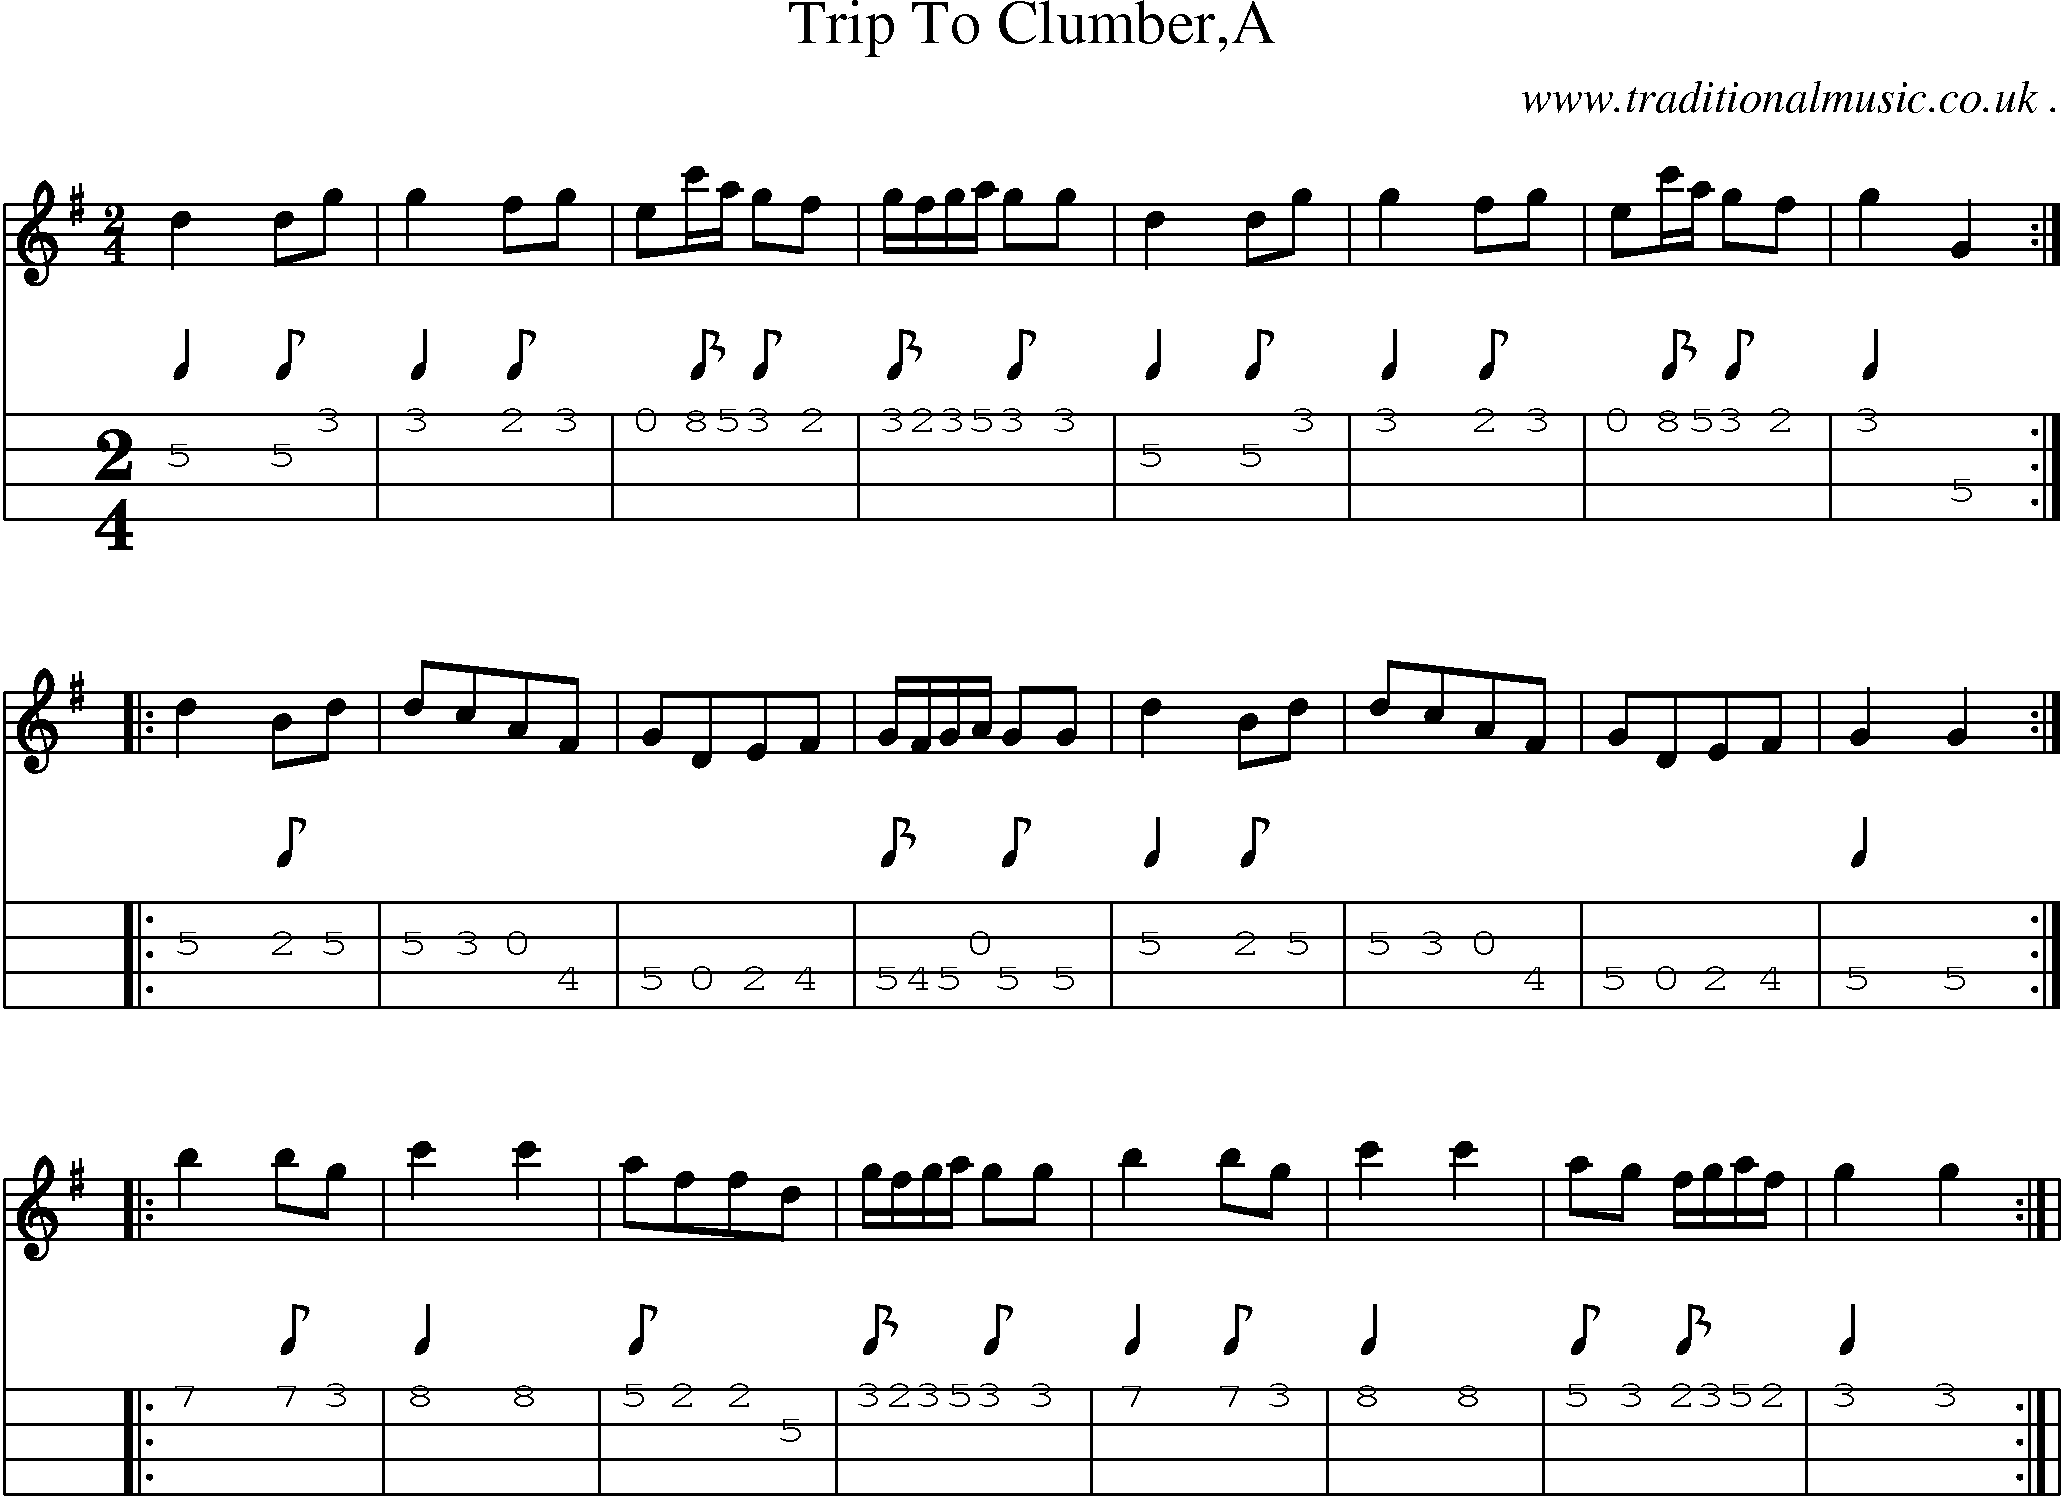 Sheet-Music and Mandolin Tabs for Trip To Clumbera